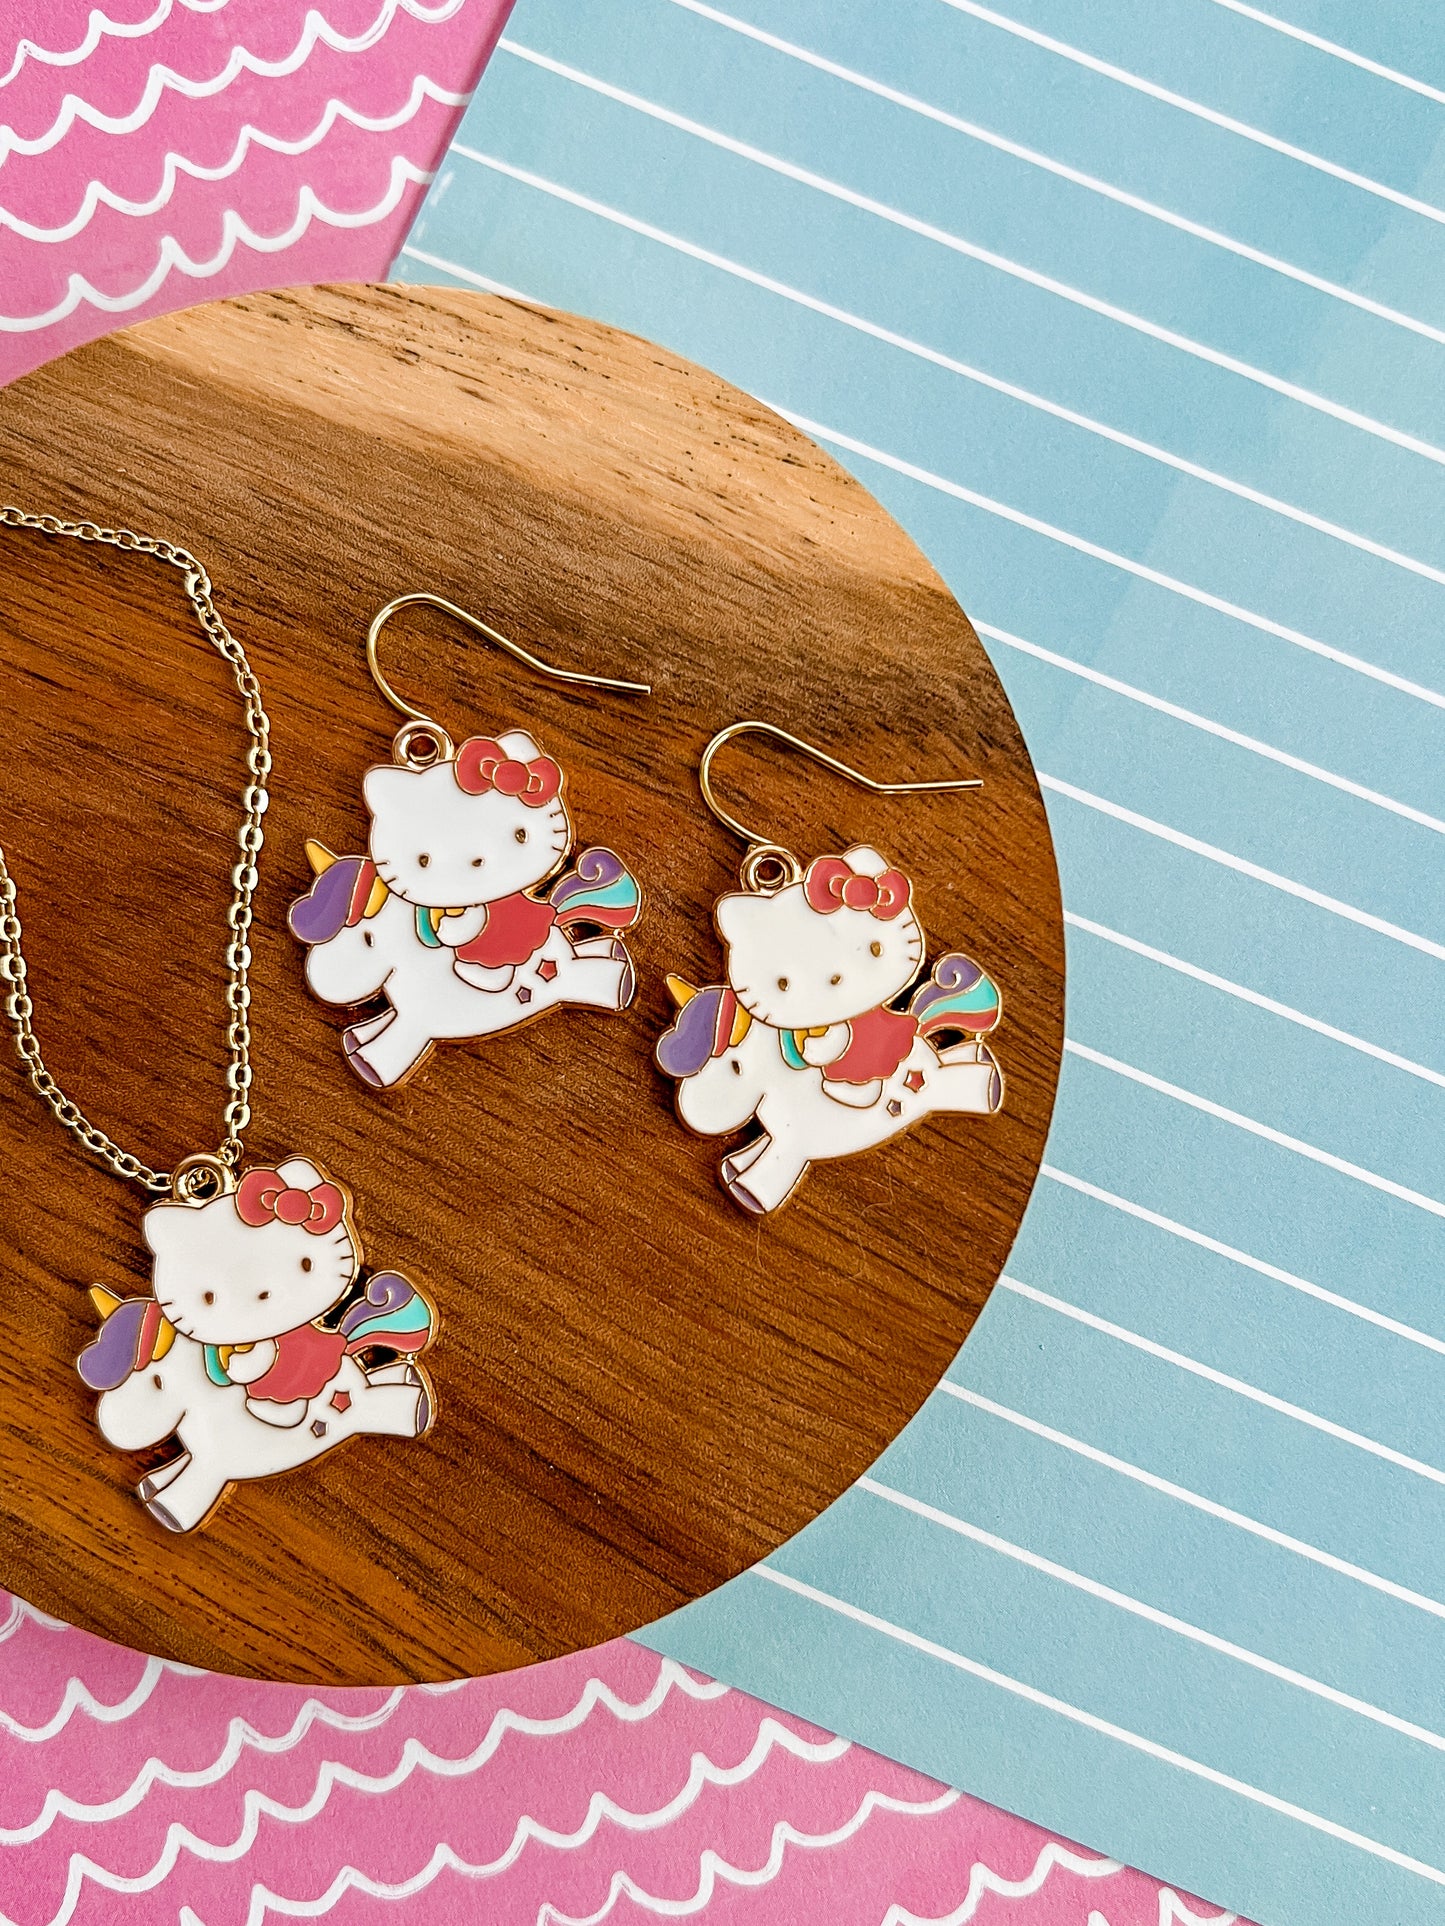 Kitty Rainbow Necklace and Earrings